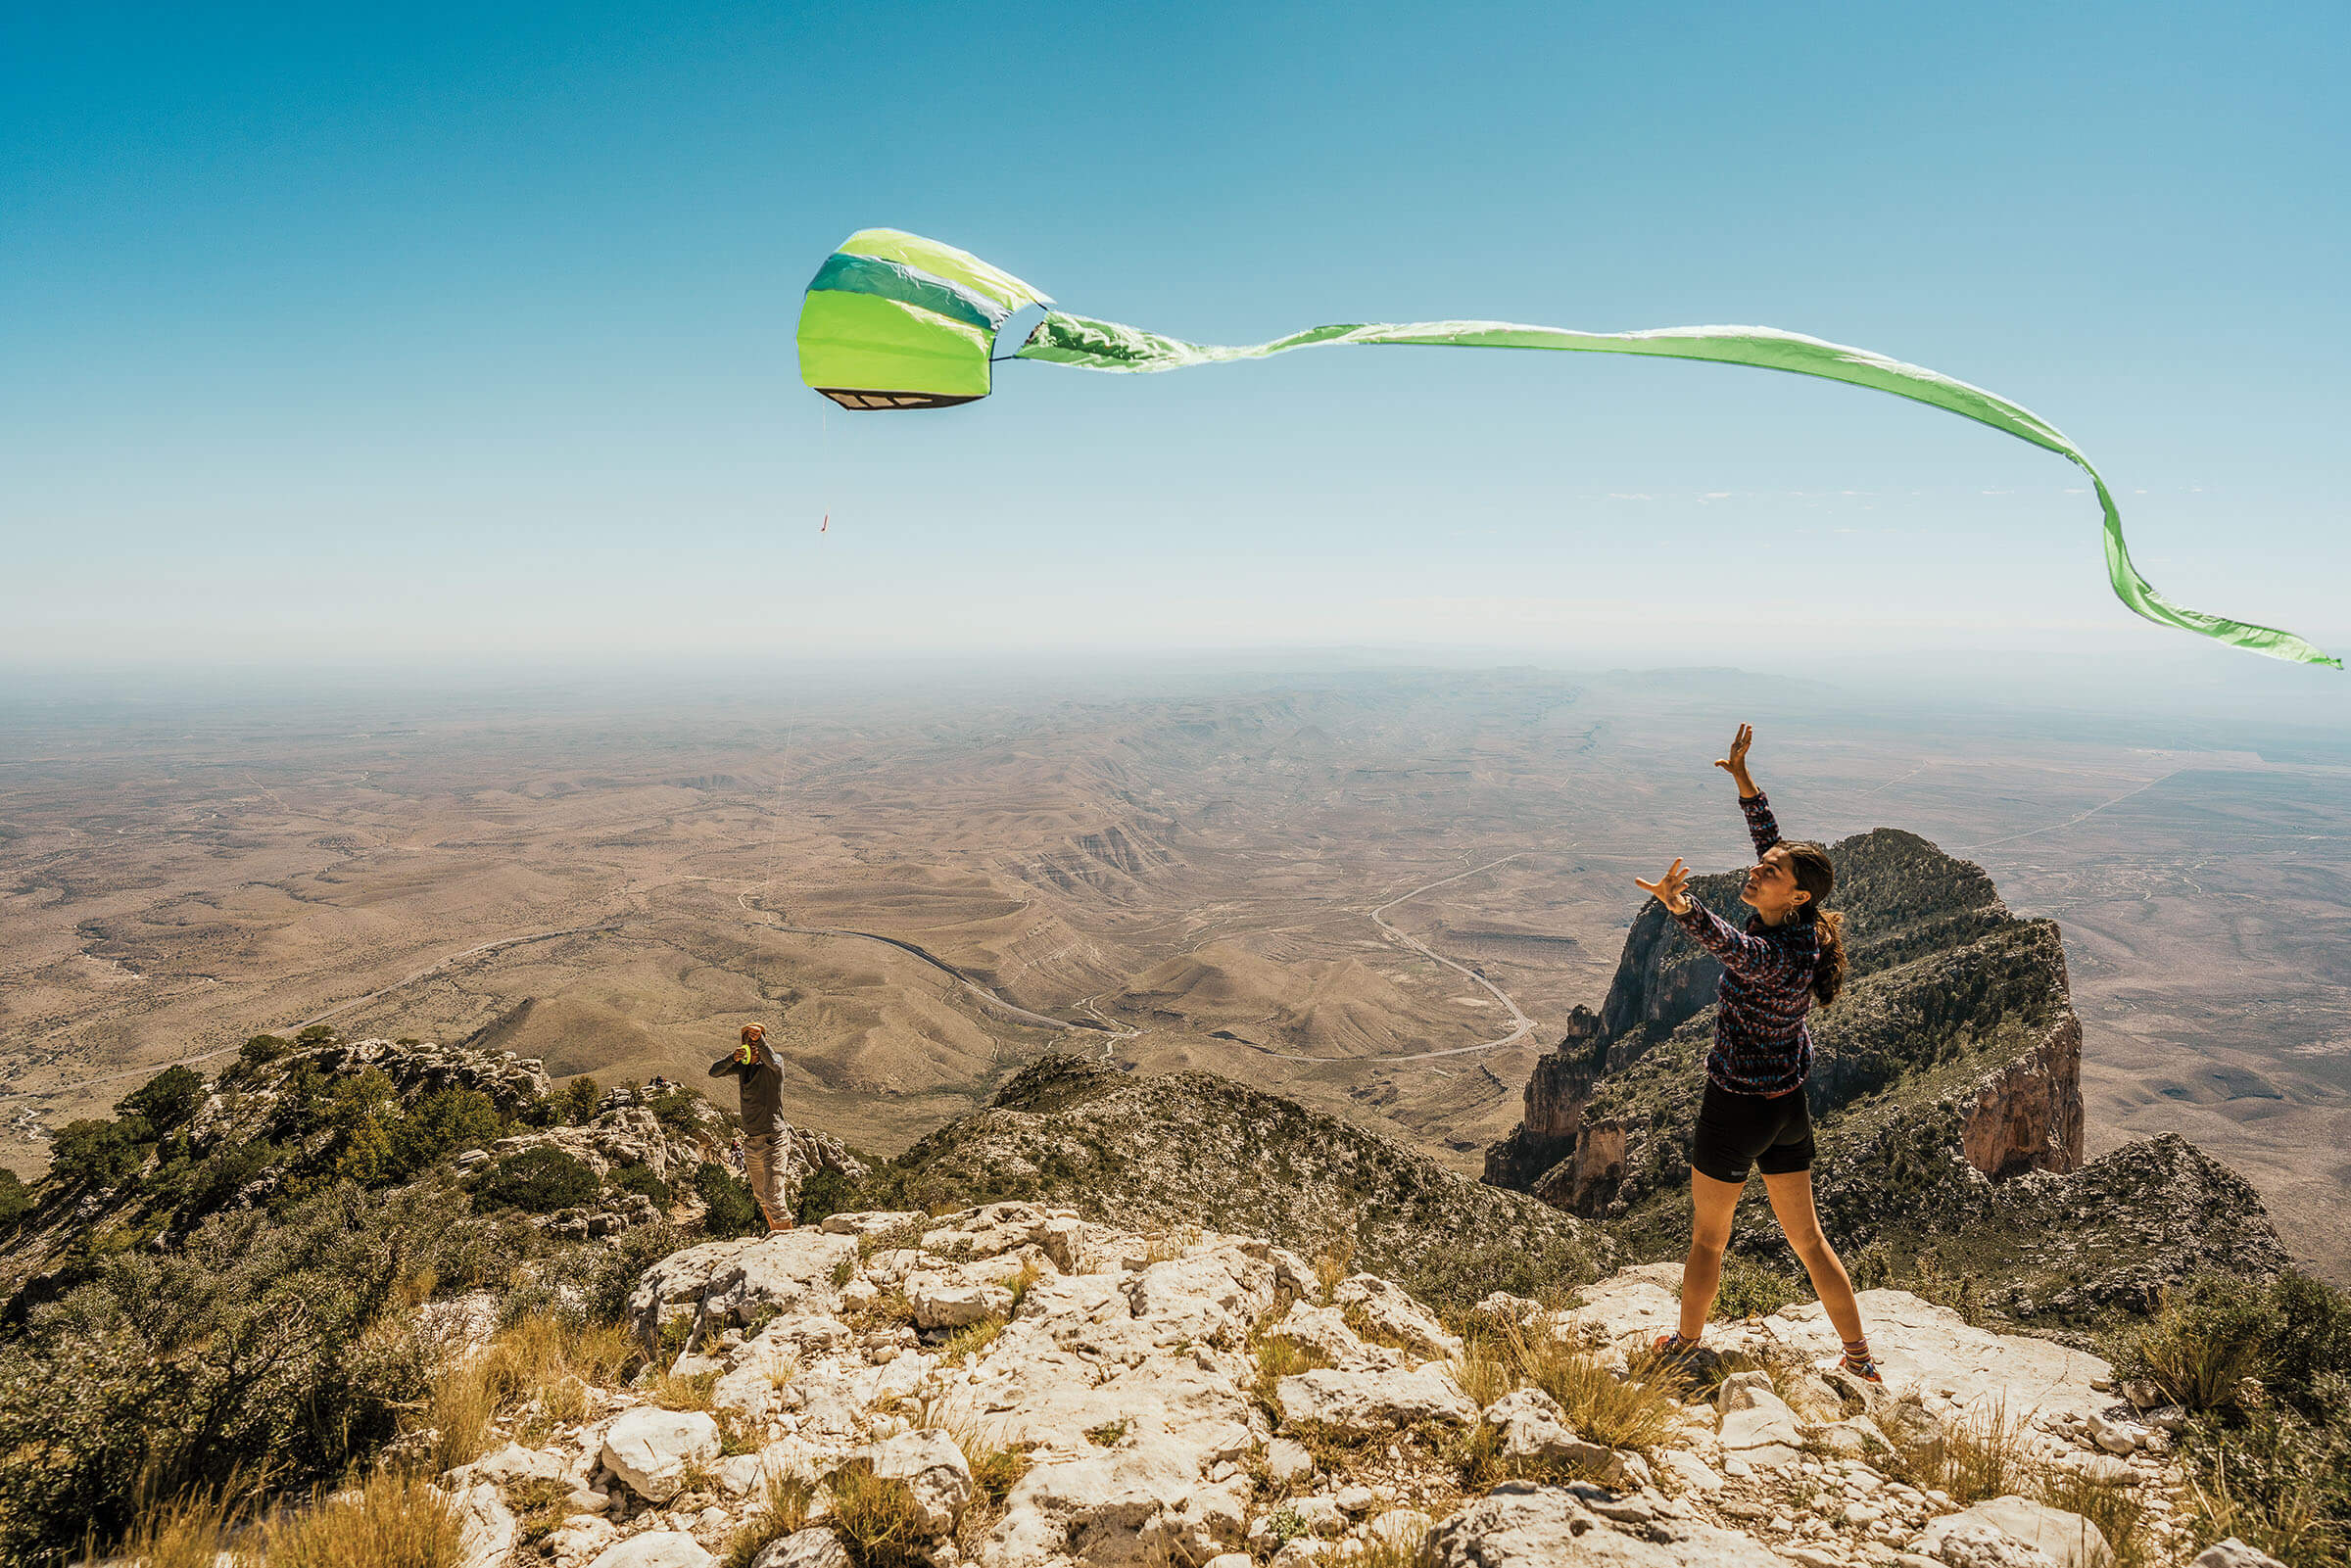 A person flies a green kite over a mountain peak on a blue sky day